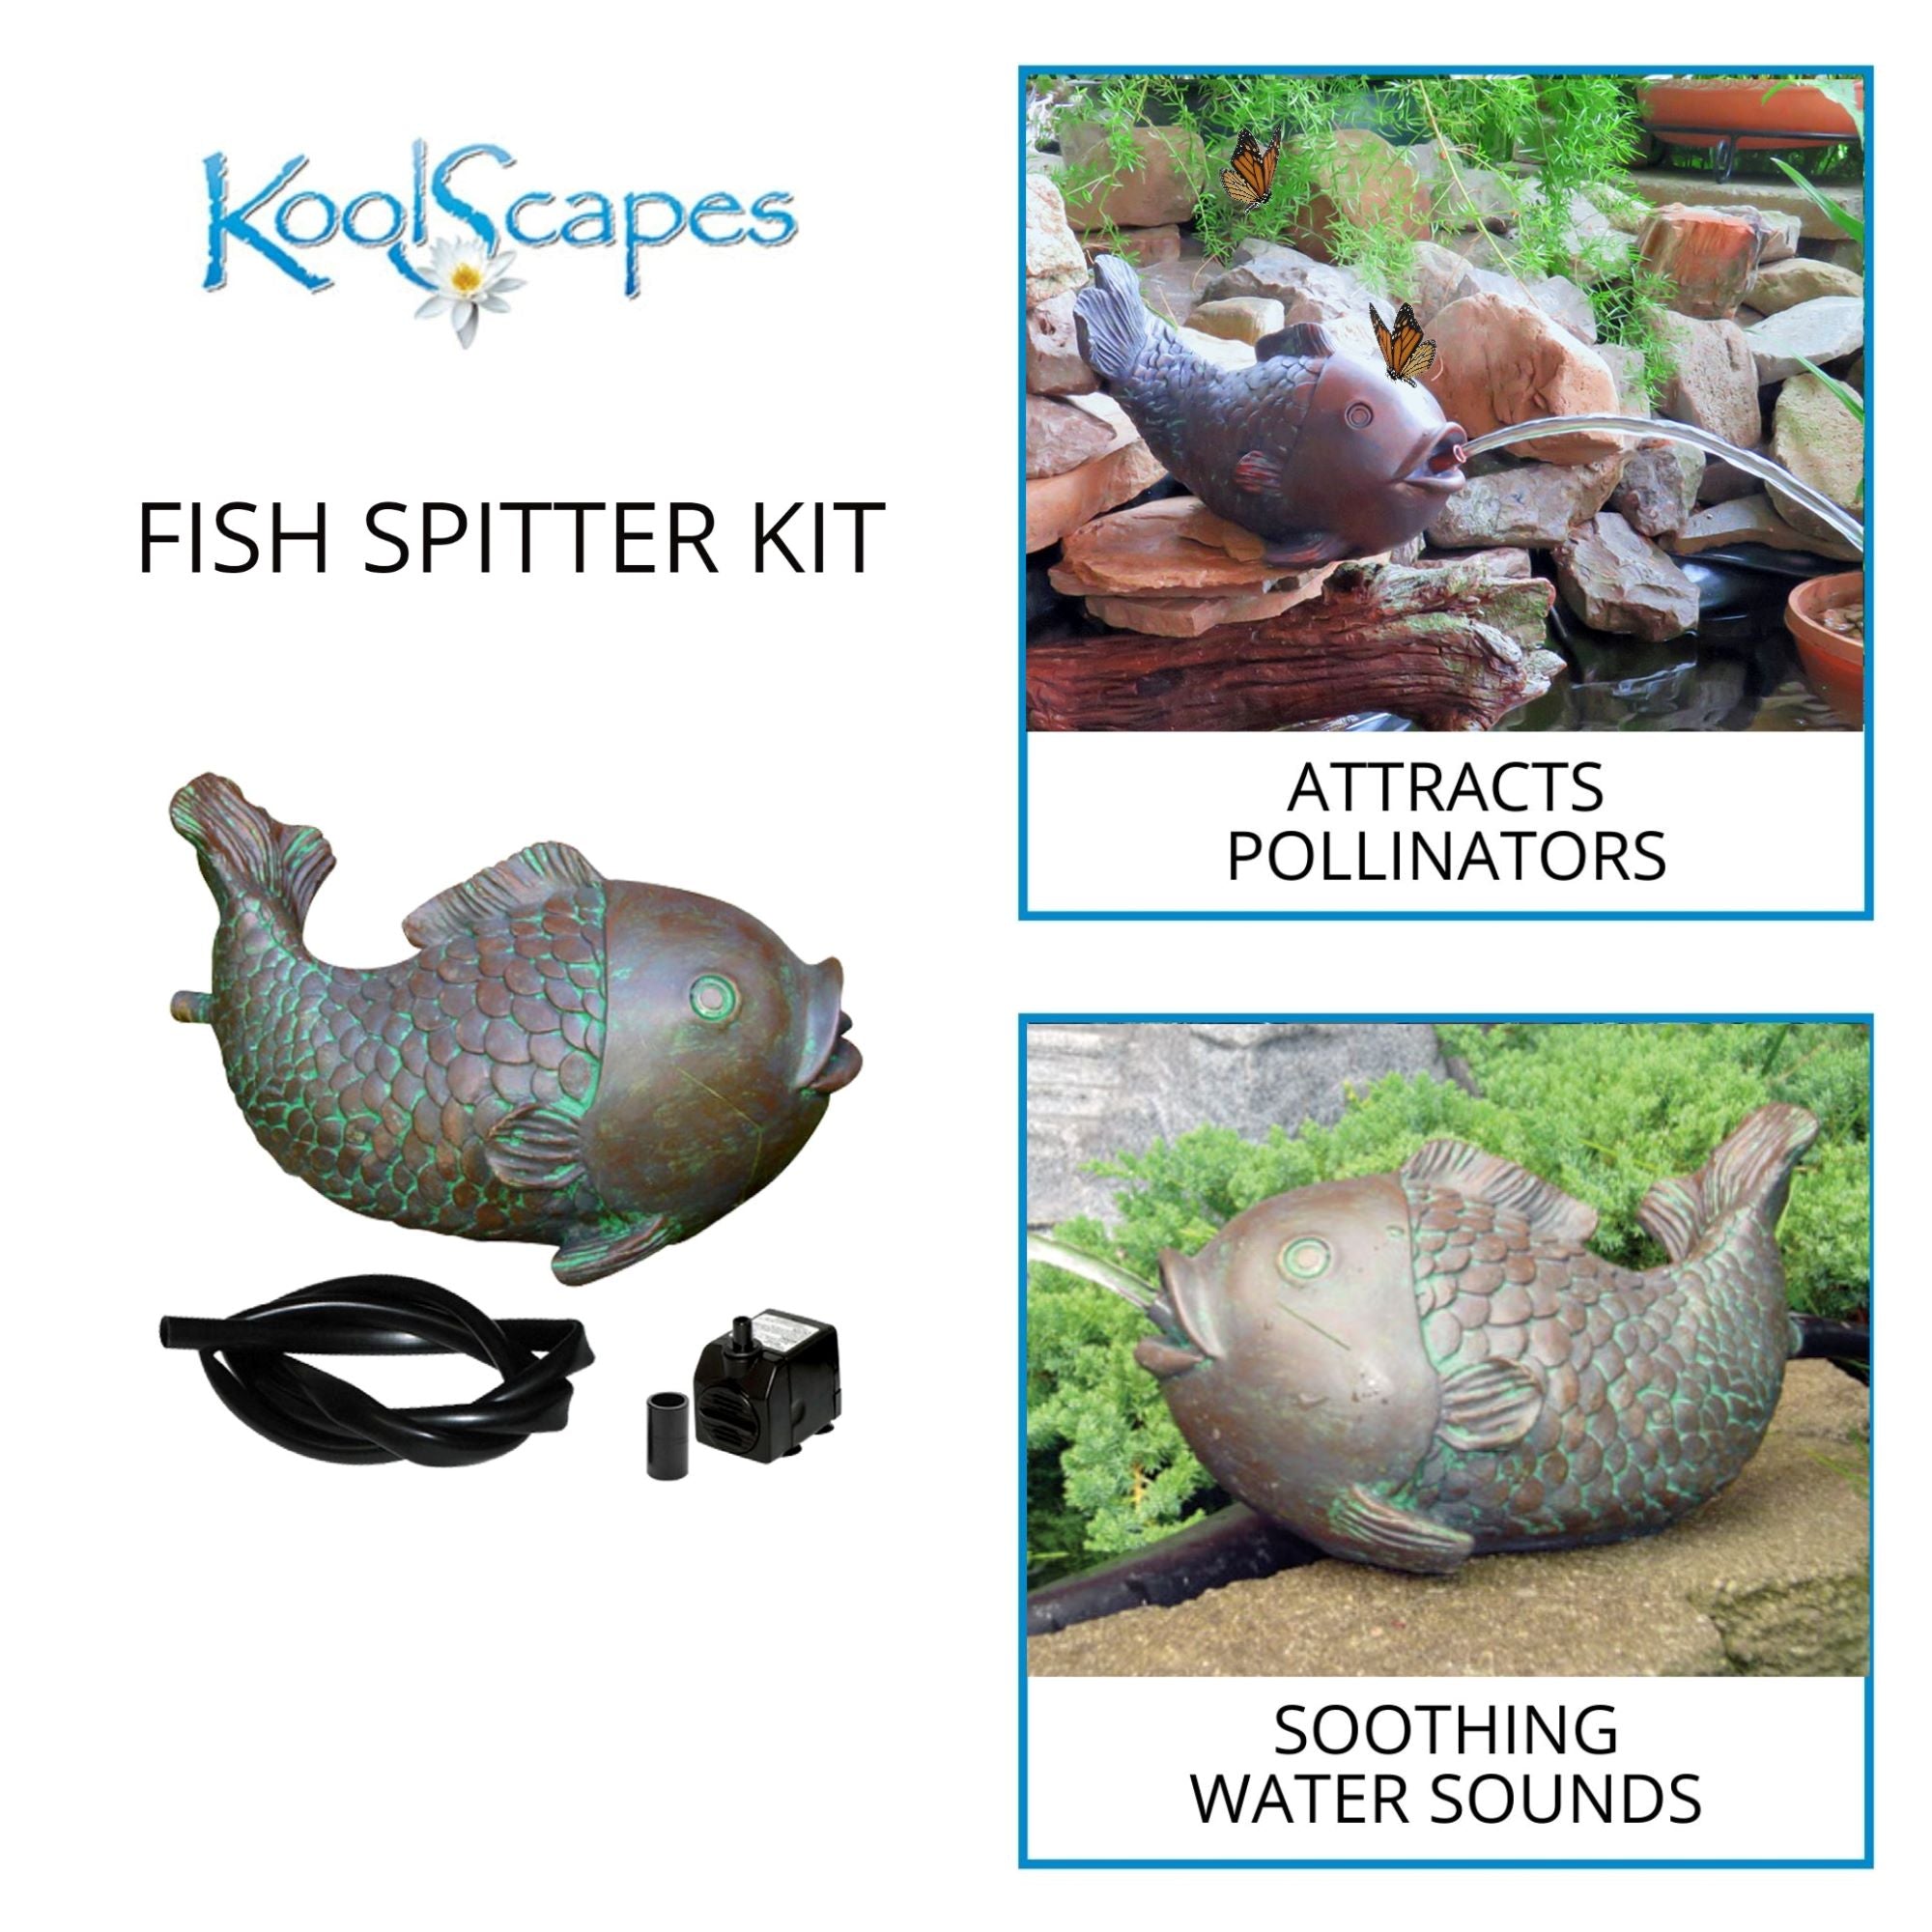 On the left is a product shot of the fish spitter with tubing and pump on a white background and text above reading, "Koolscapes fish spitter kit. On the right are two lifestyle images: Top shows the fish spitter on the side of a backyard pond with two monarch butterflies hovering around it, labeled, "Attracts pollinators." Bottom shows a closeup of the fish spitter on a flagstone with green foliage behind and water flowing from its mouth, labeled, "Soothing water sounds" 